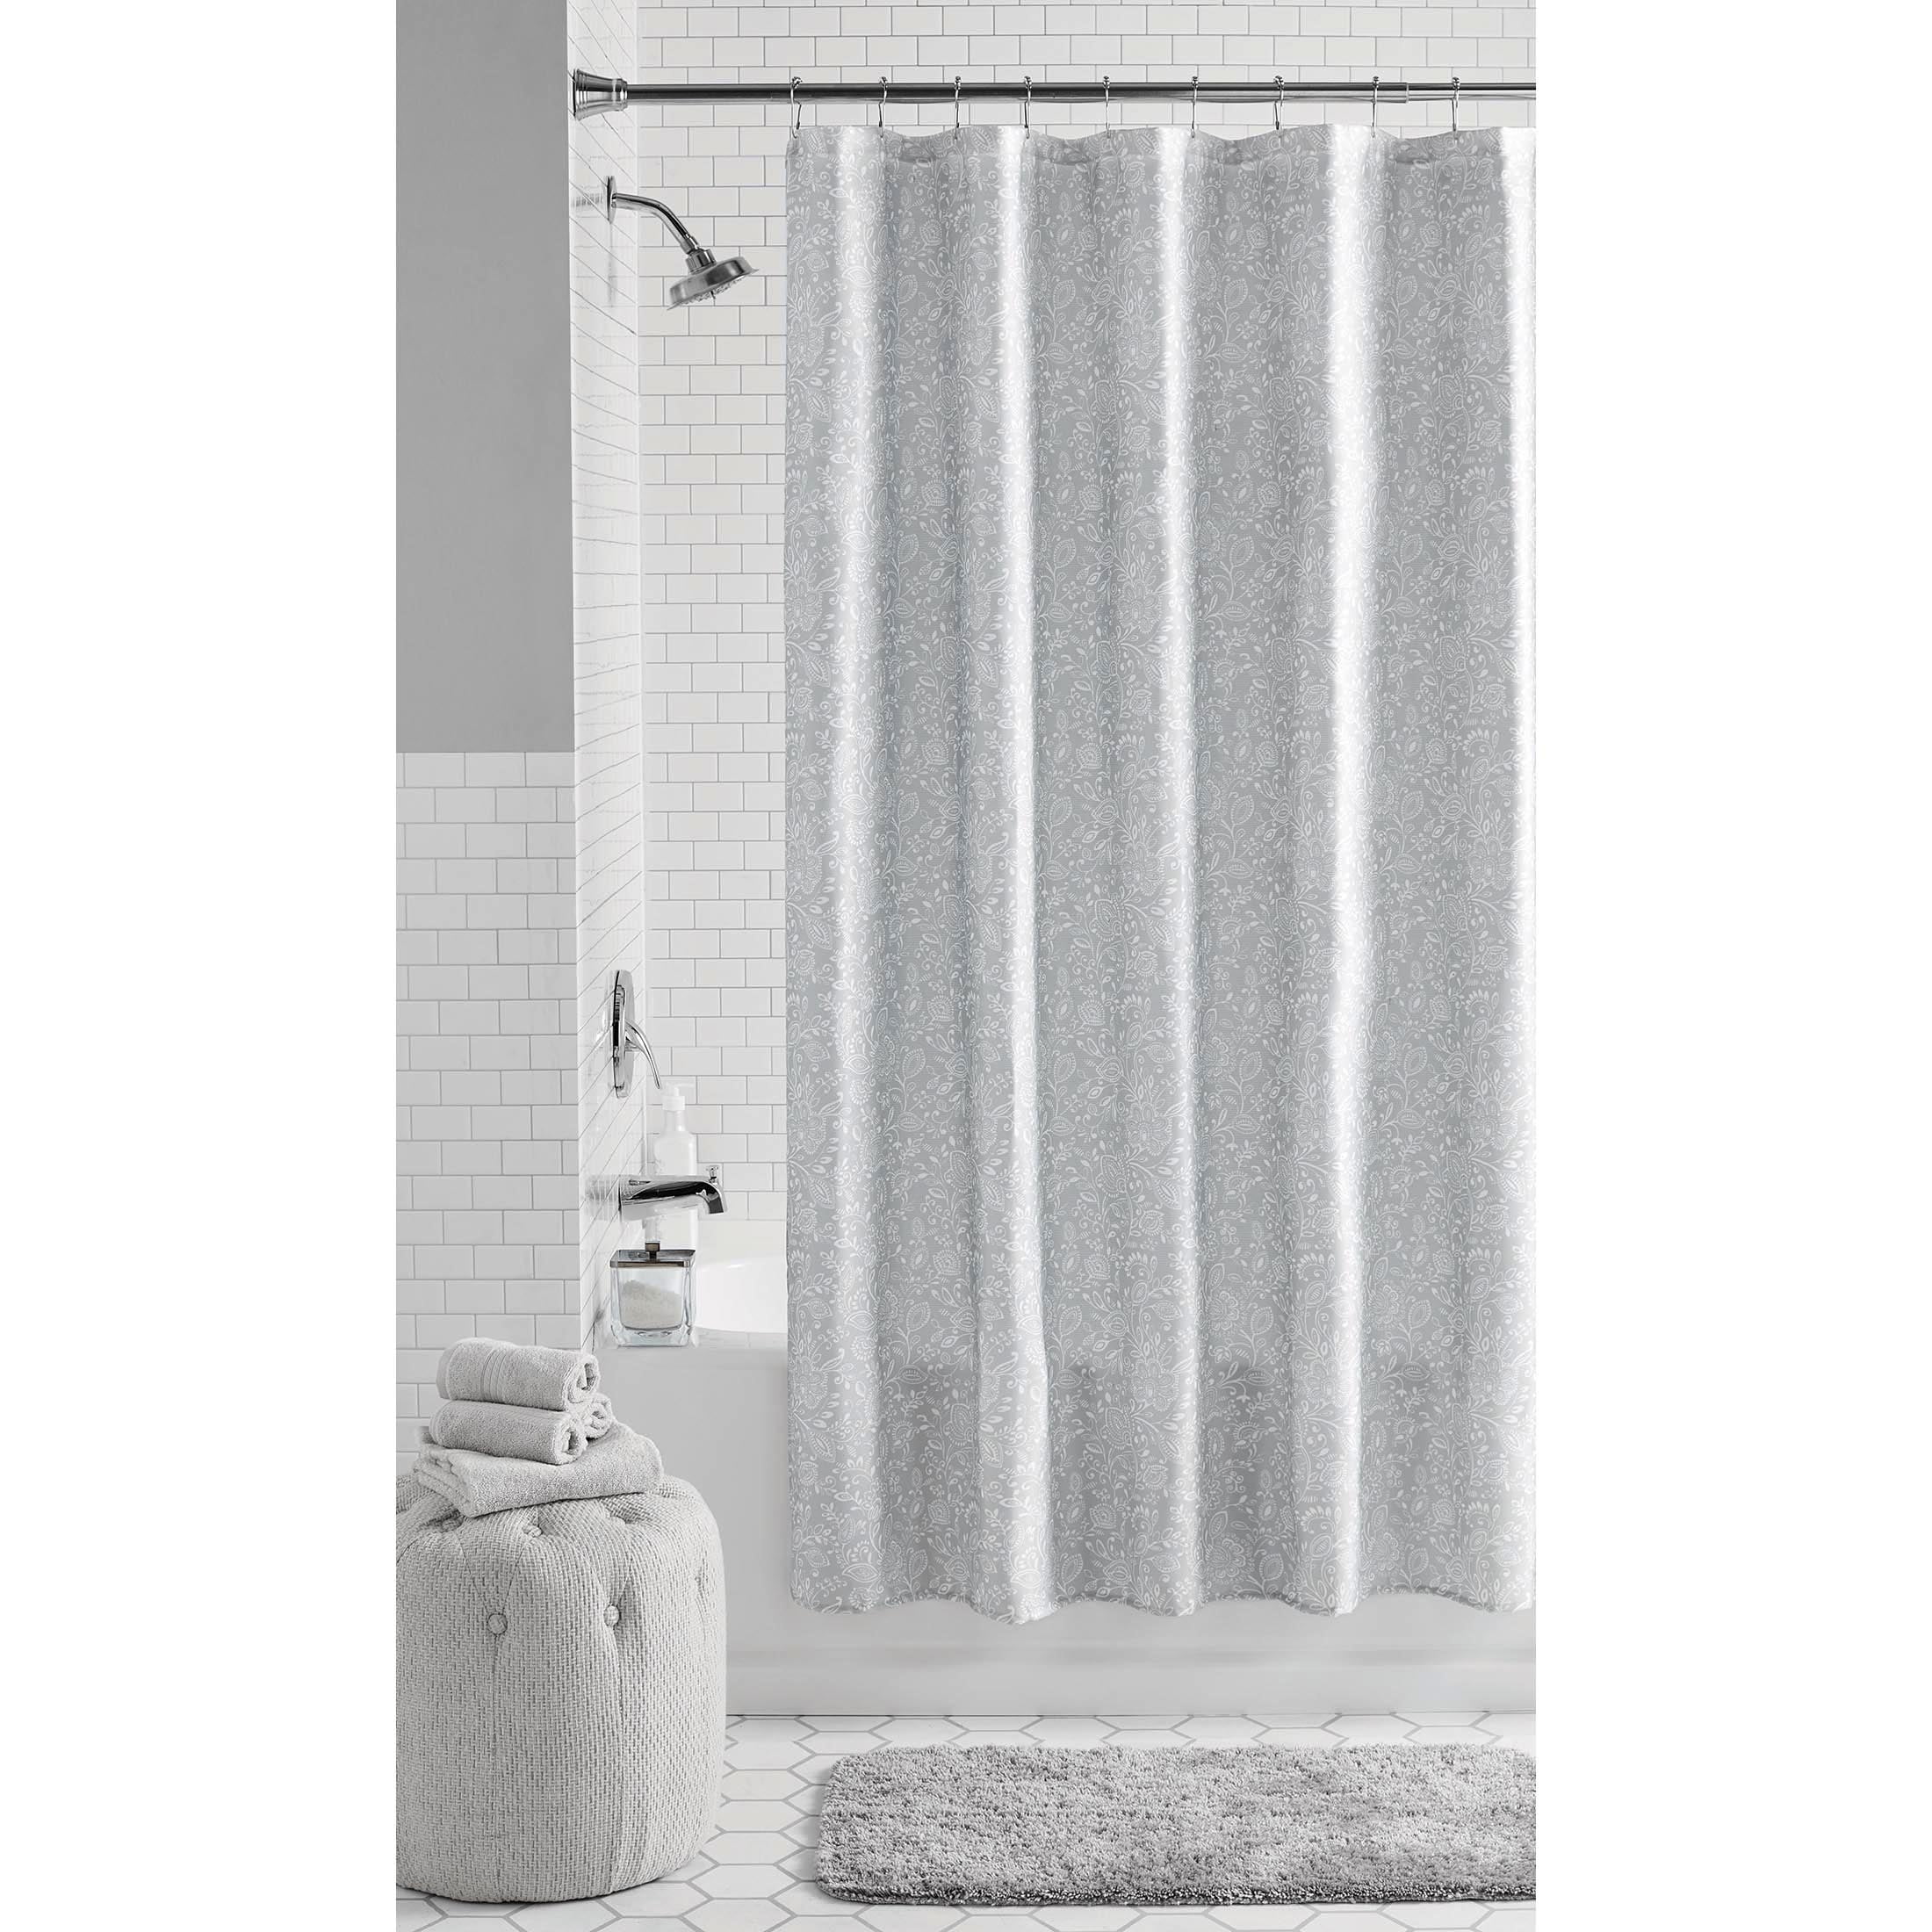 Details about   SDLIVING Hudson Paisley Waterproof Microfibe Shower Curtain,Taupe Polyester Fabr 